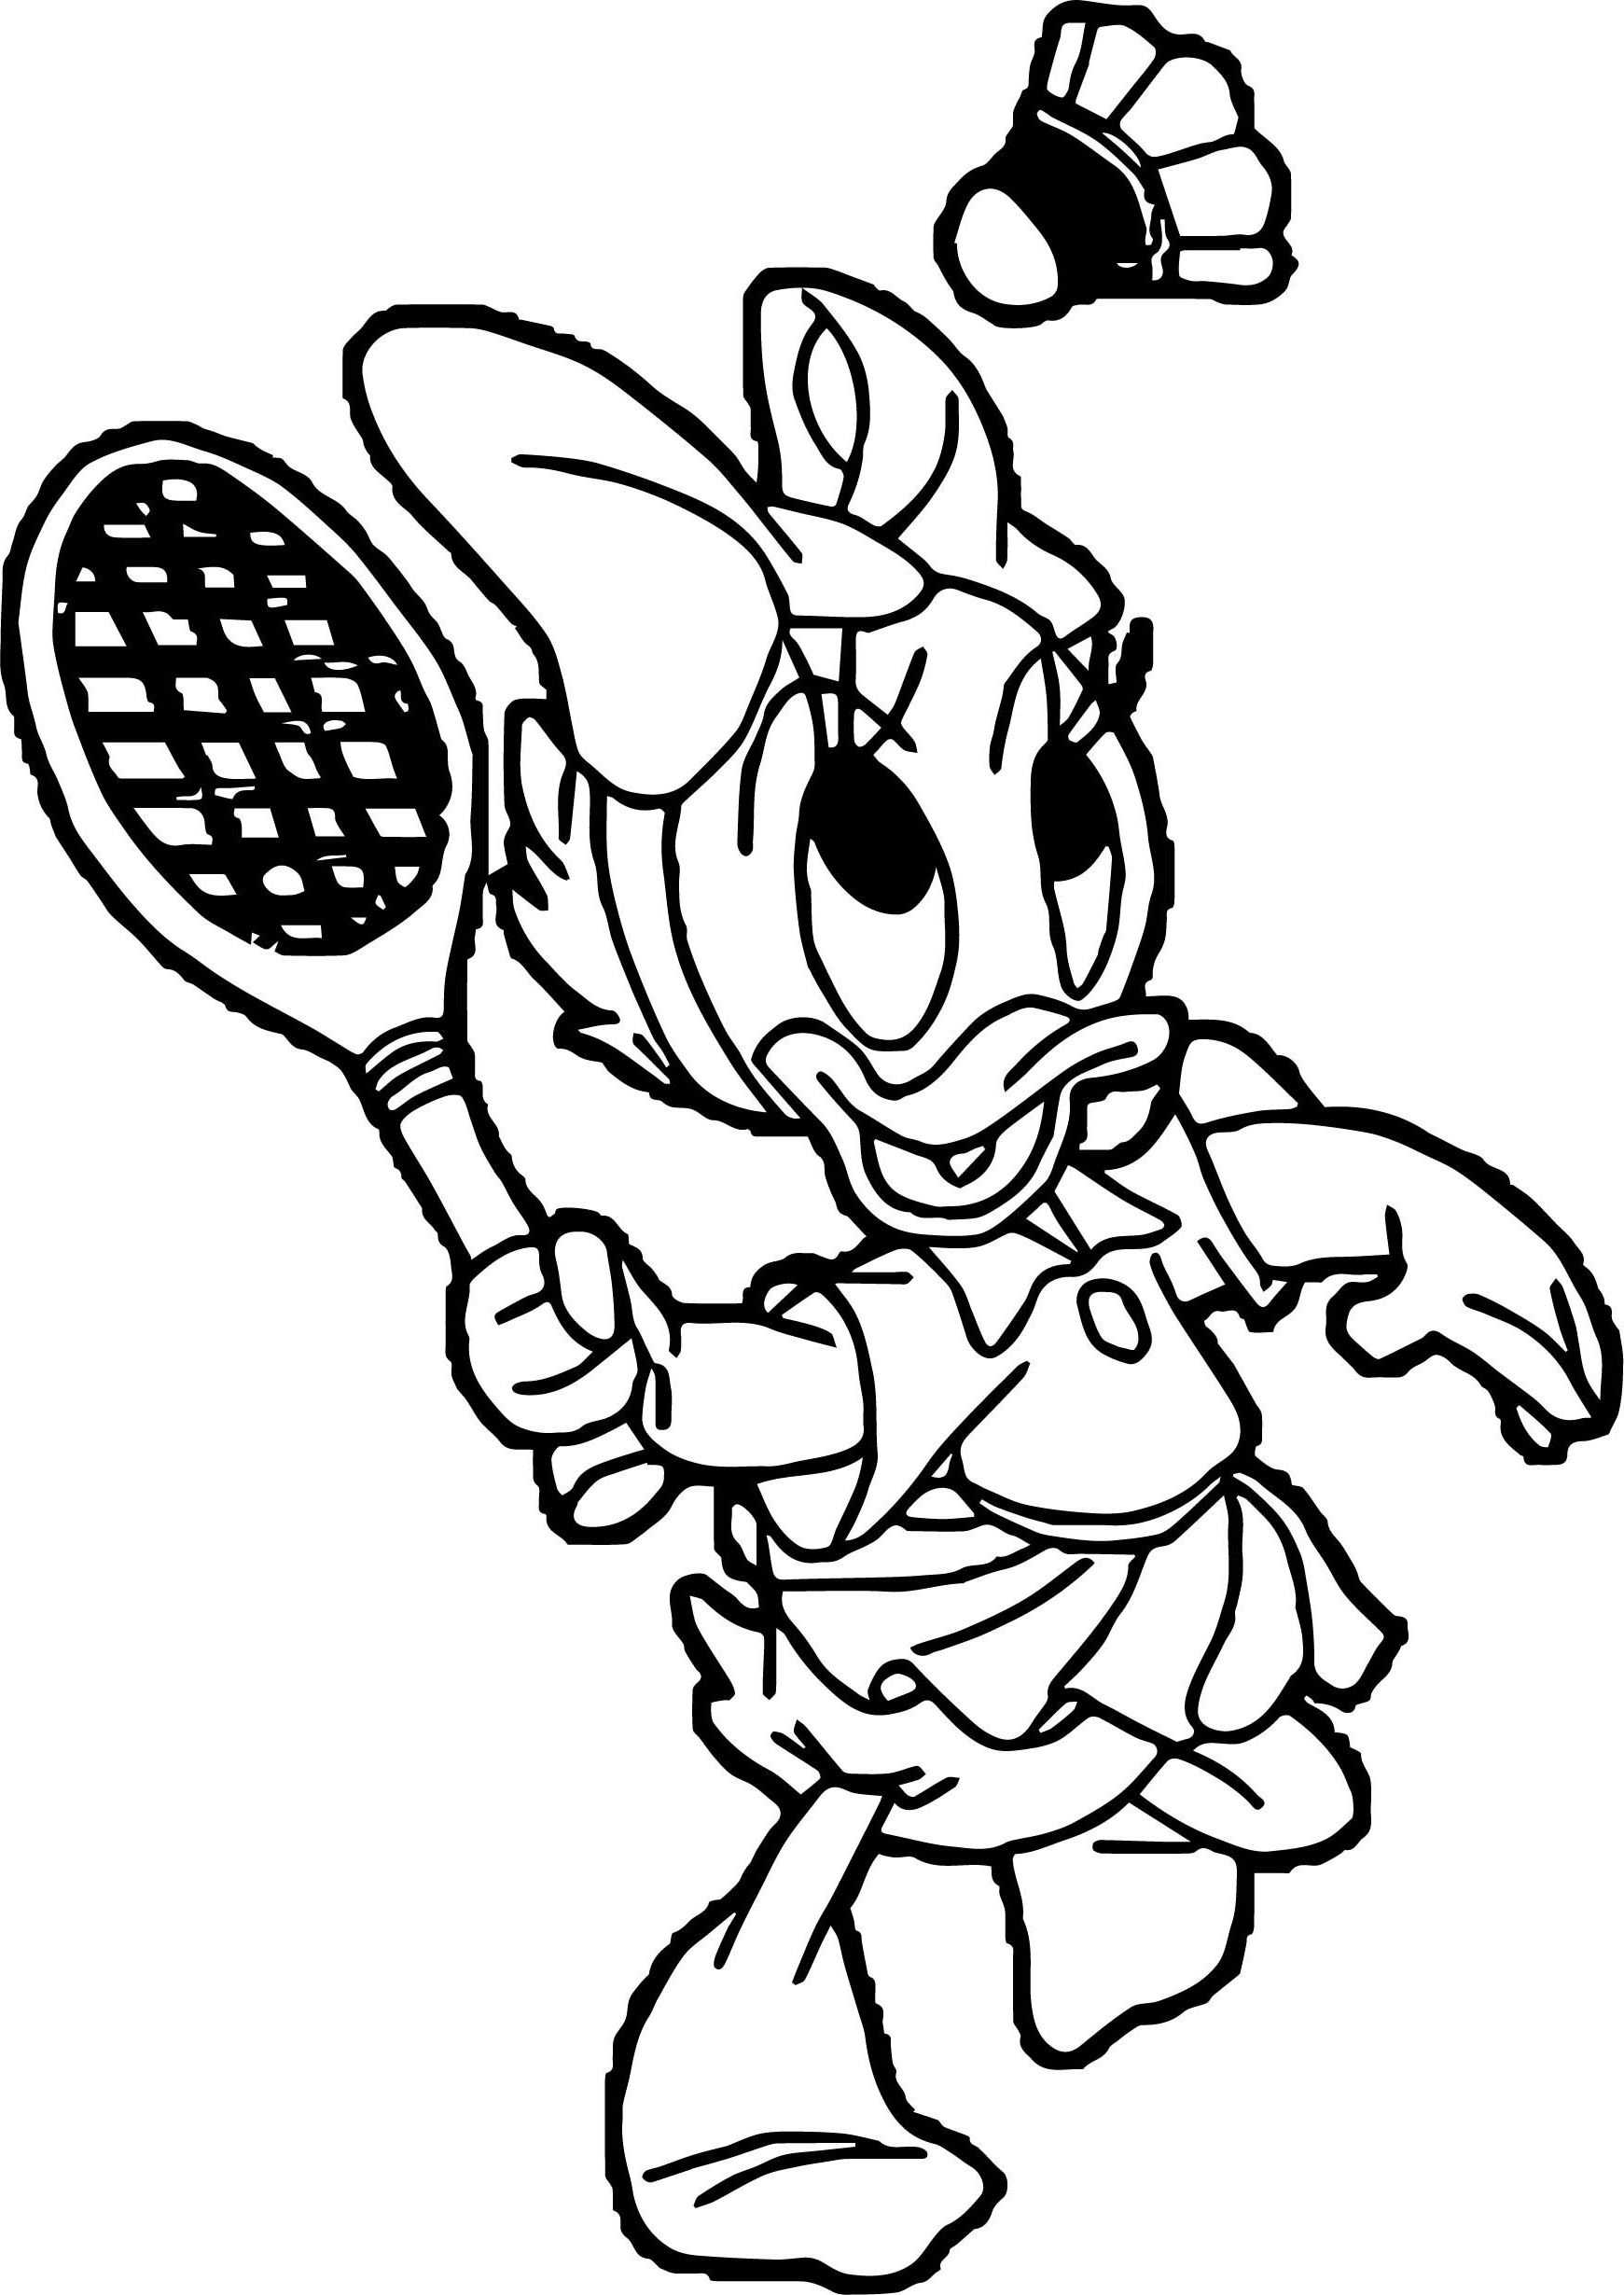 Daisy Playing Badminton Coloring Page